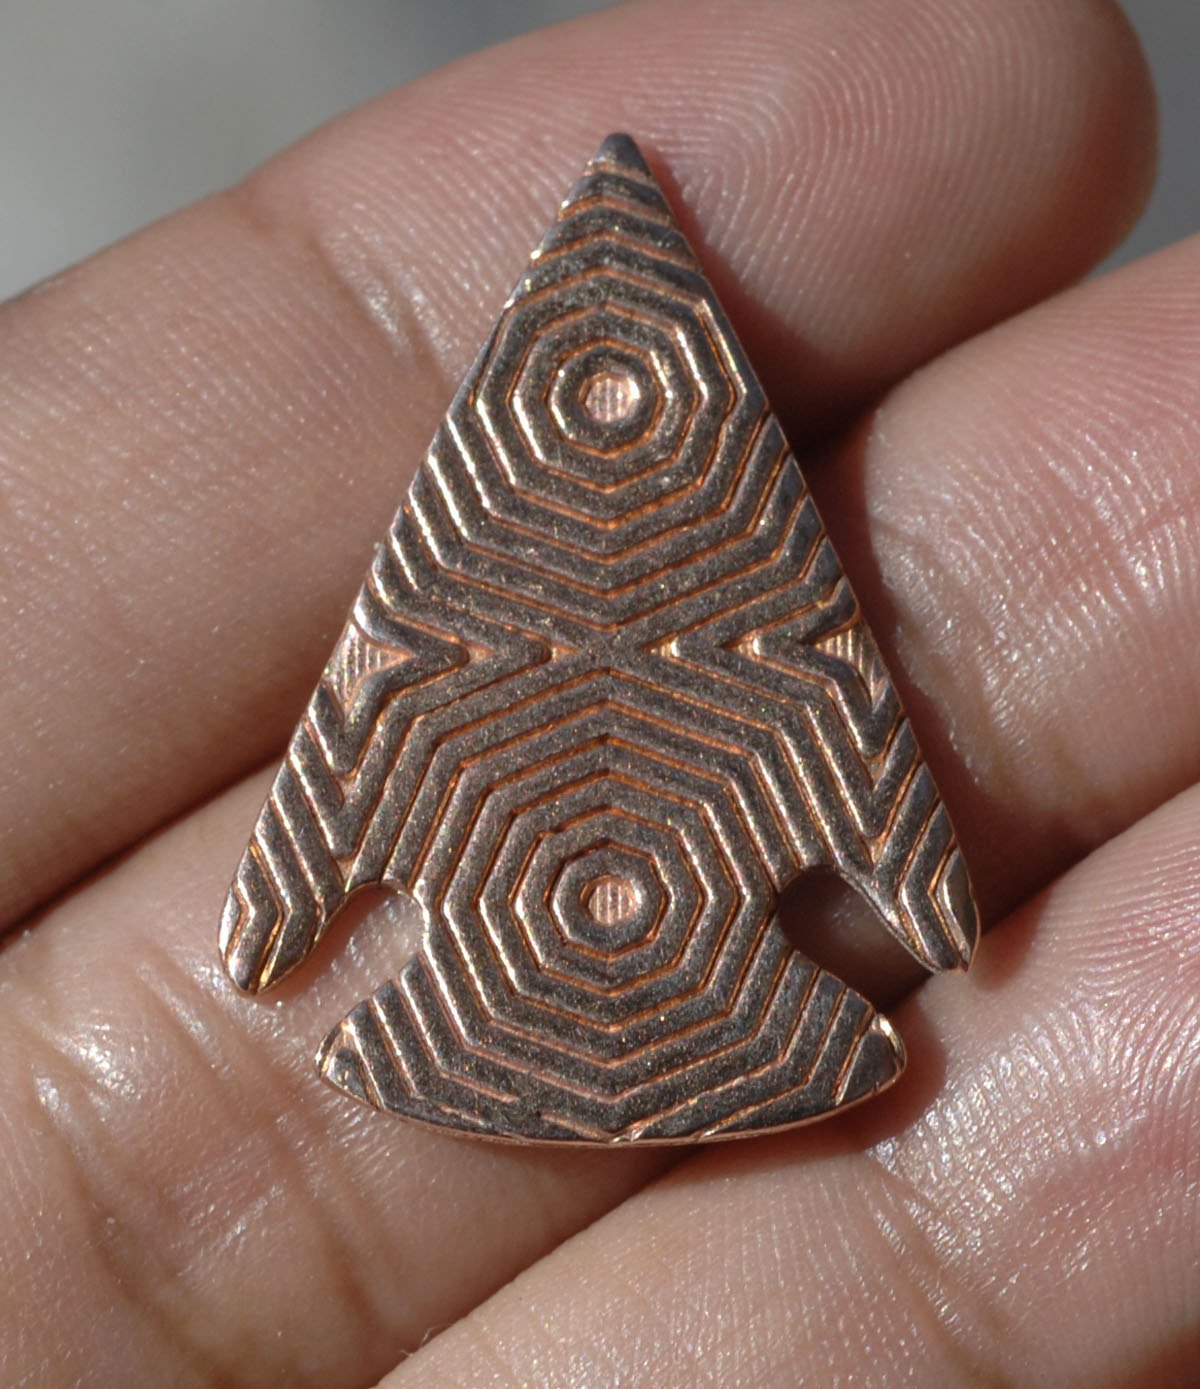 4 Arrowhead Variety of Metal in Pattern, Charms for Jewelry Making Metalworking - Jewelry Supplies